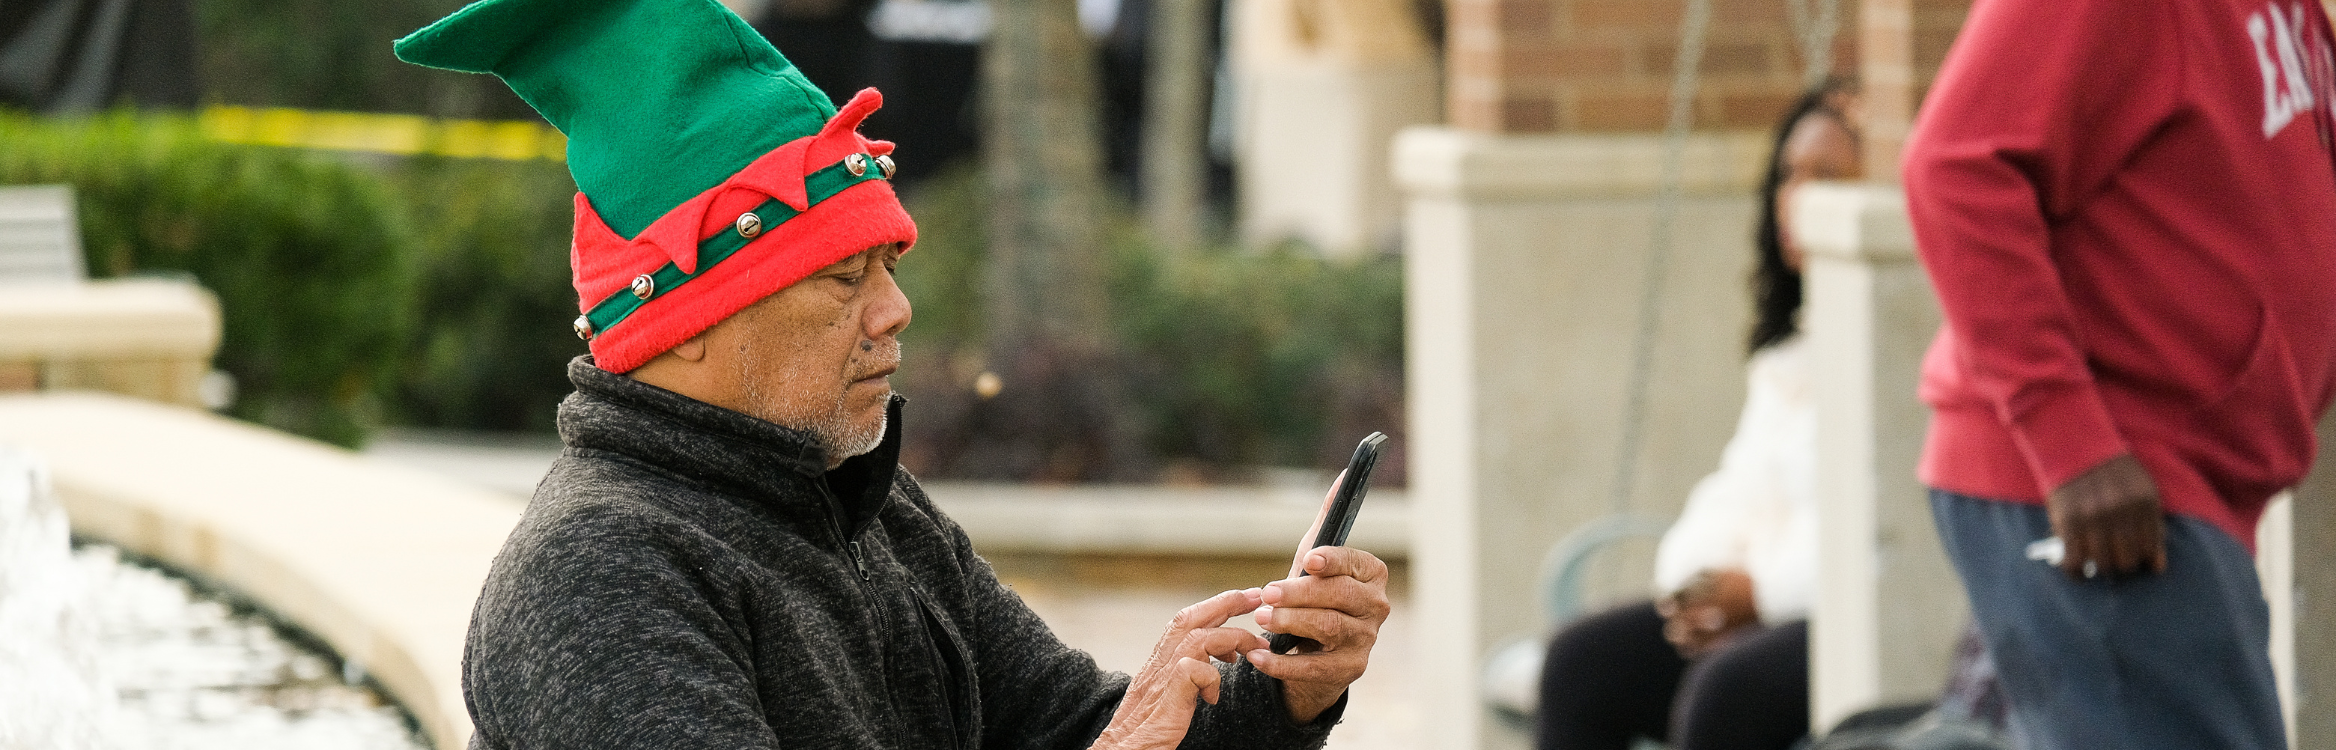 A man wearing an elf hat looking at his phone